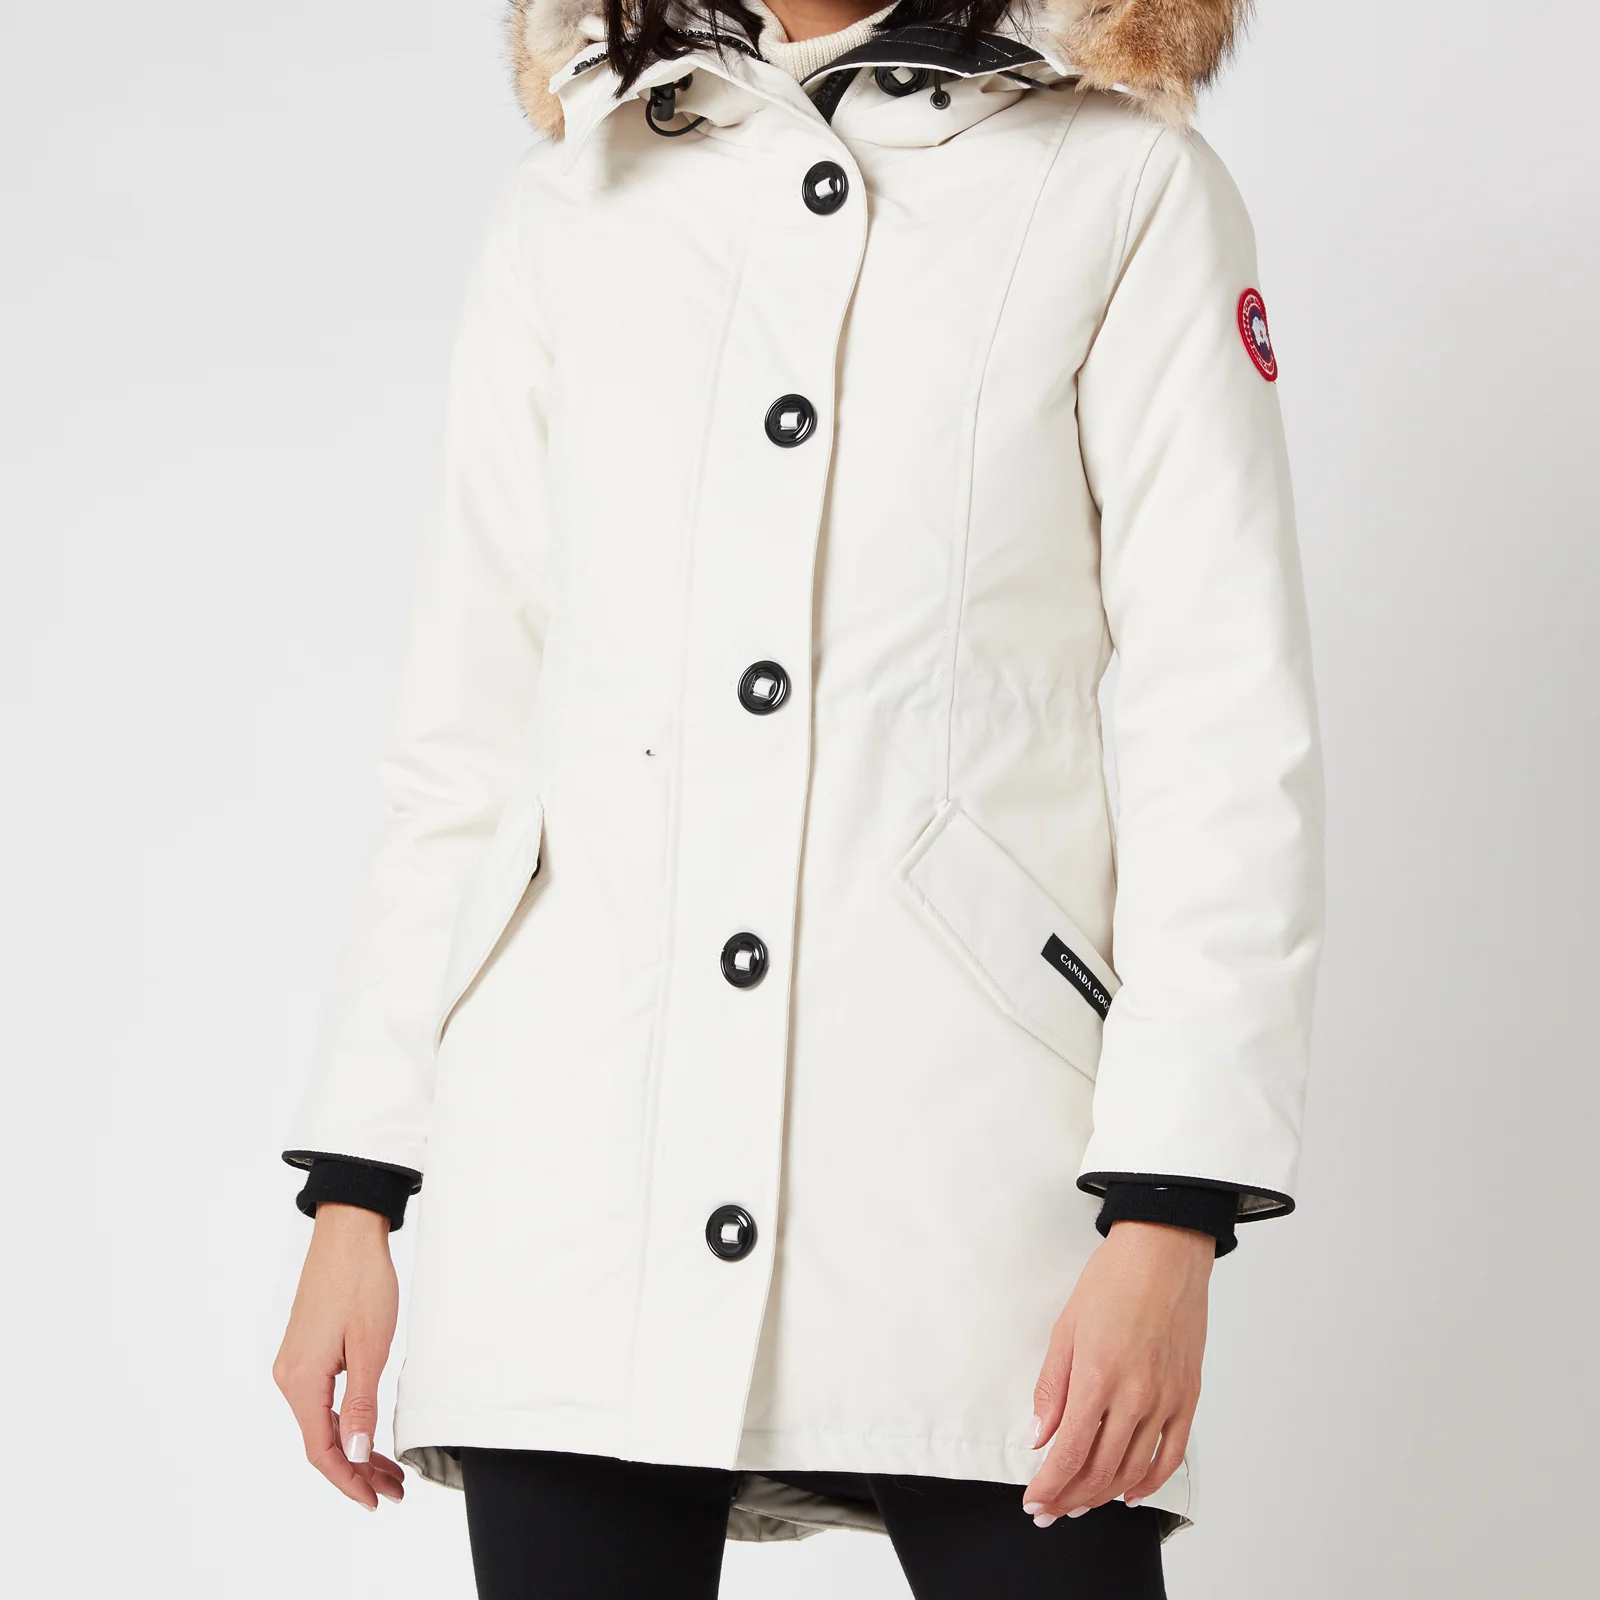 Canada Goose Women's Rossclair Parka - Early Light Image 1